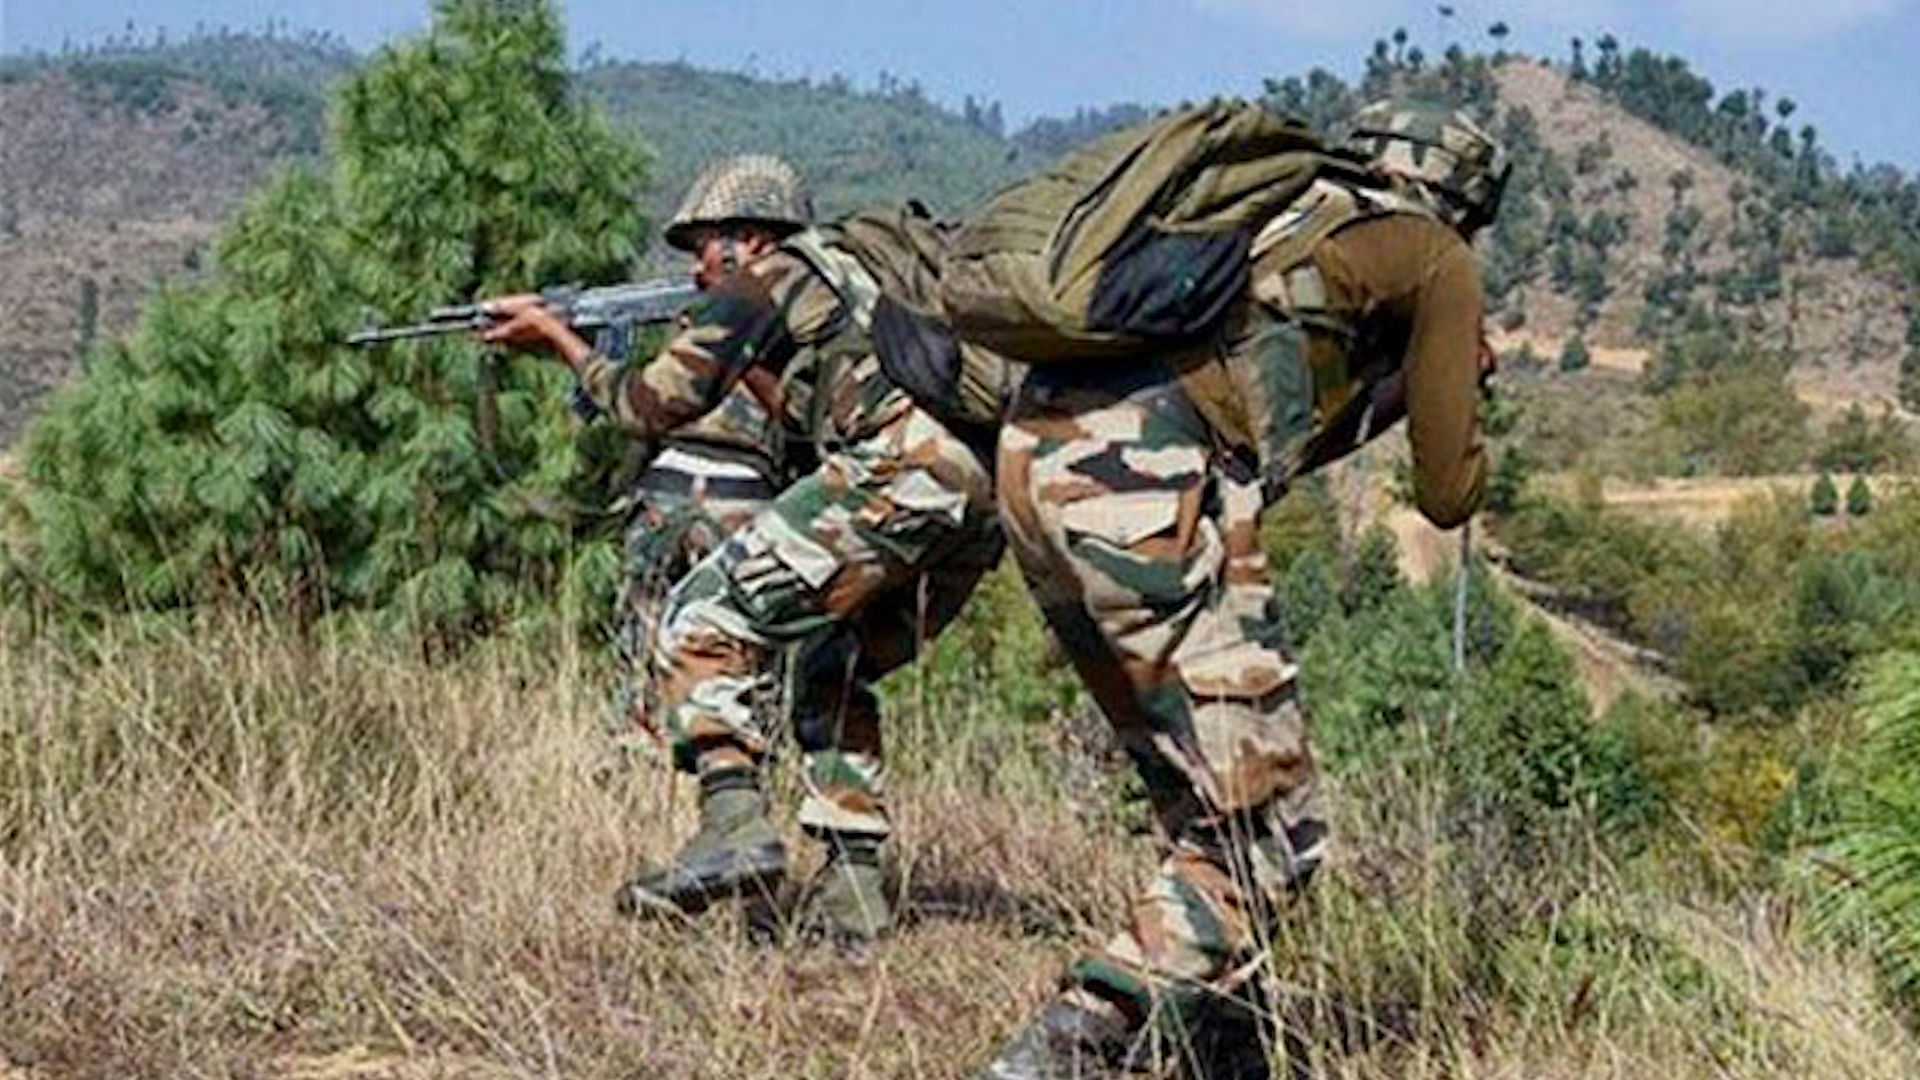 Indian Army personnel posted along the Line of Control in Jammu and Kashmir. Image used for representational purposes only.